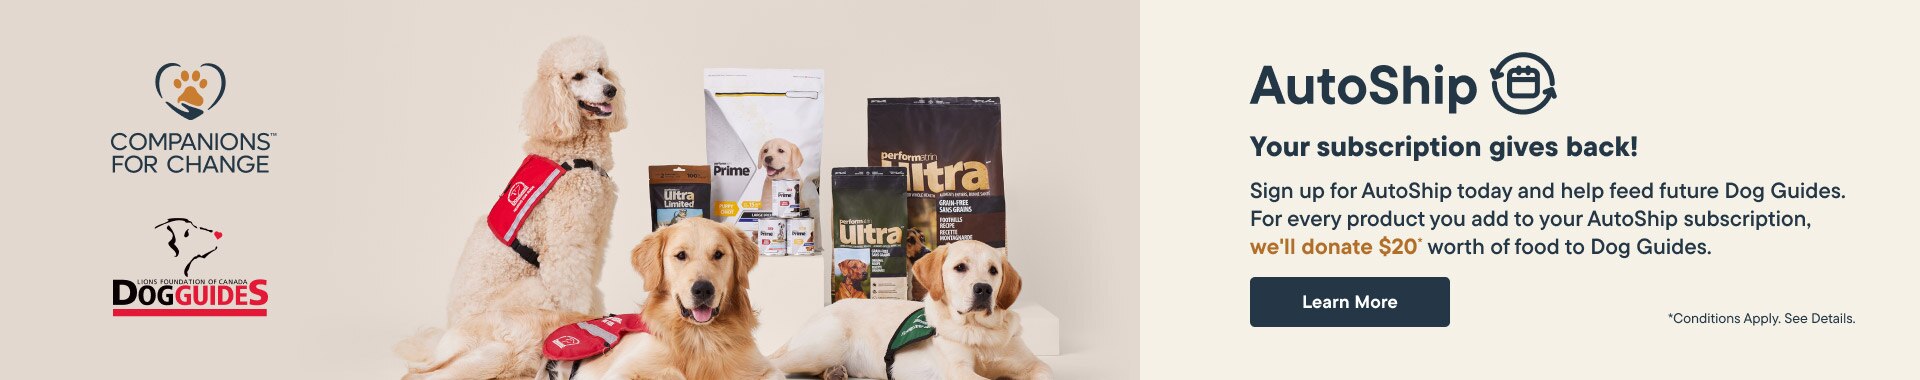 AutoShip - Your subscription gives back to Dog Guides! Learn More